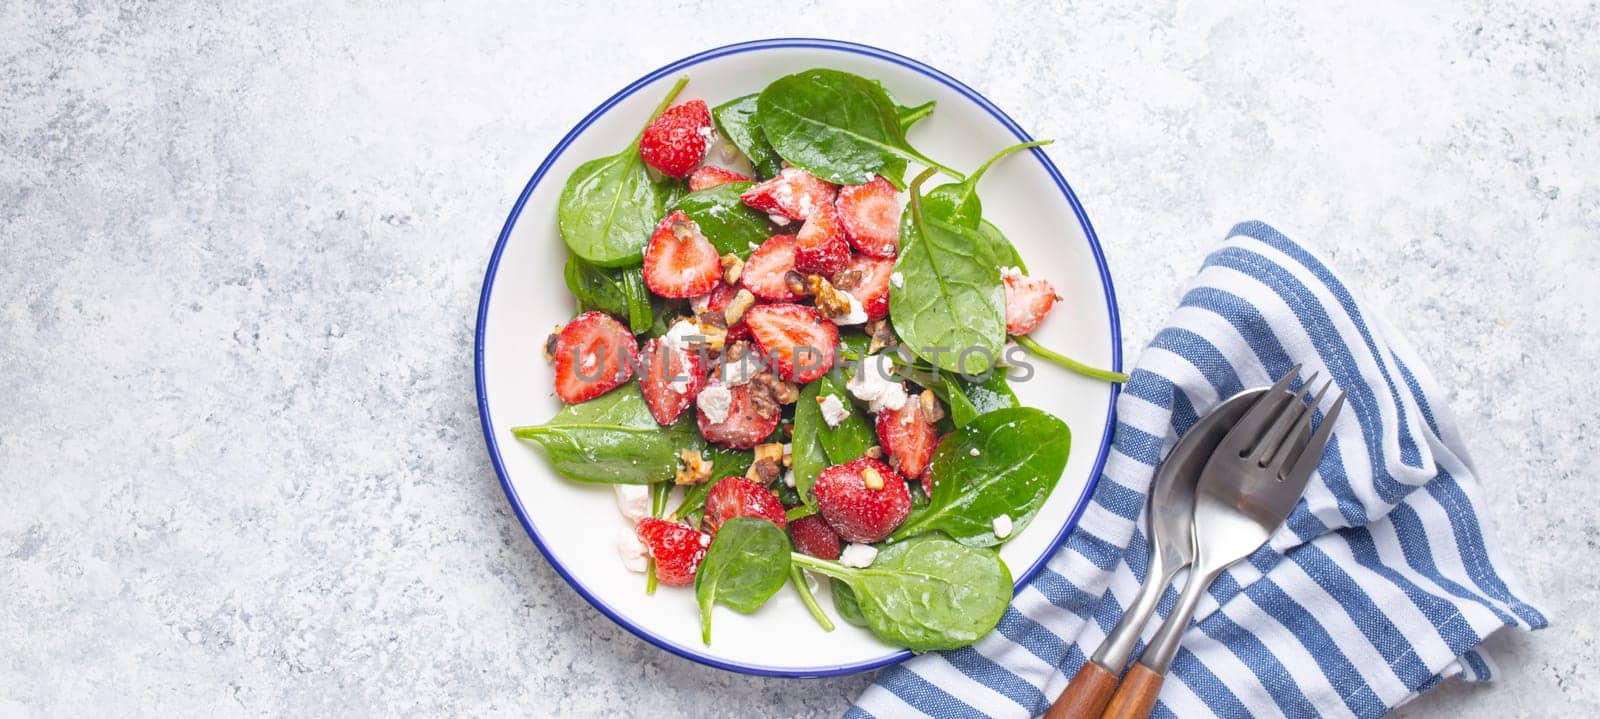 Light Healthy Summer Salad with fresh Strawberries, Spinach, Cream Cheese and Walnuts on White Ceramic Plate, white rustic stone Background From Above. by its_al_dente